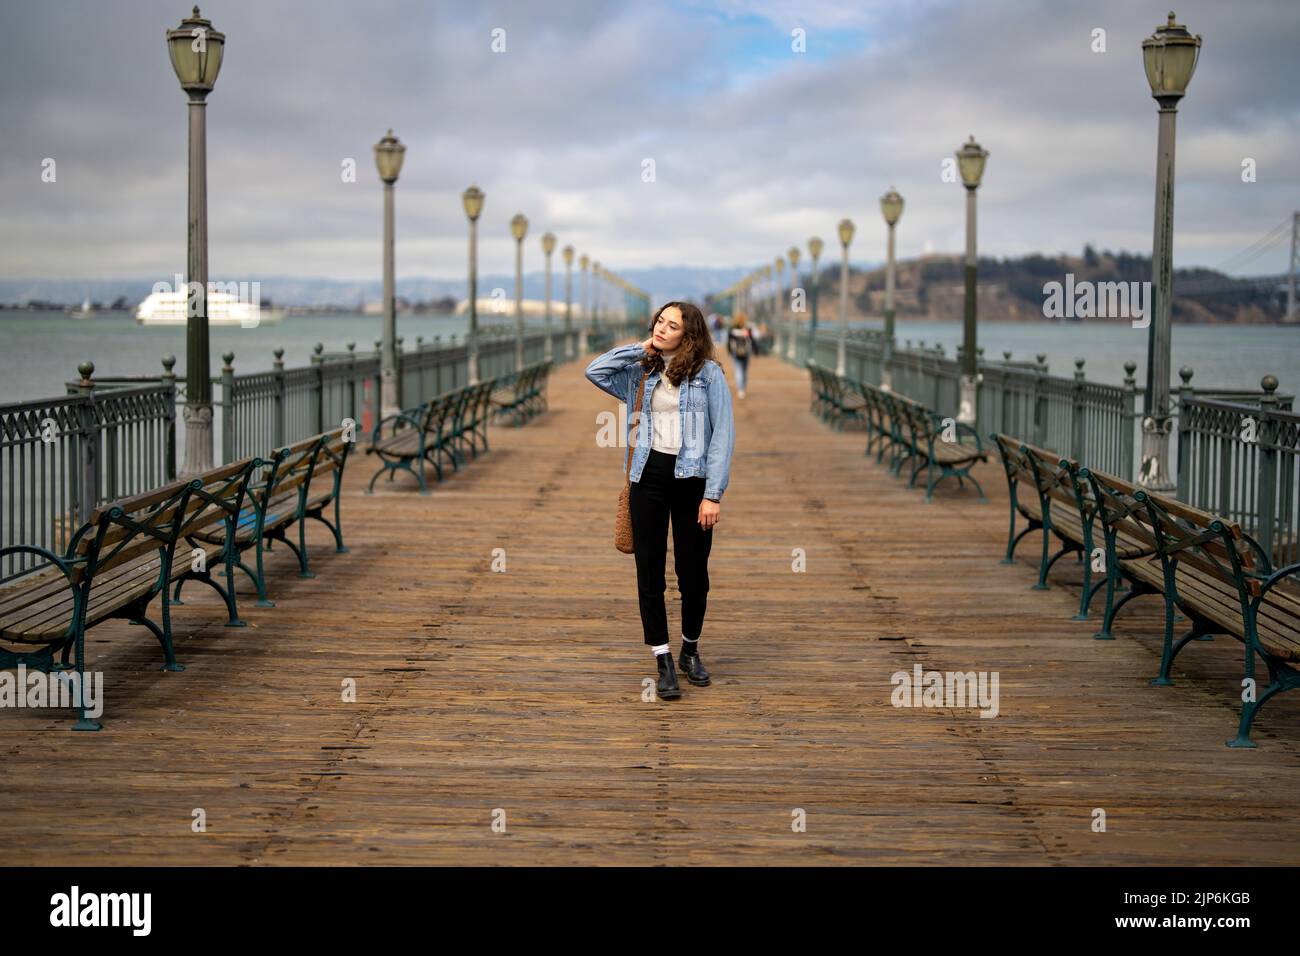 Unposed Portrait of Young Woman on Pier 7 Walking Towards Camera with San Francisco Bay in the Background Stock Photo